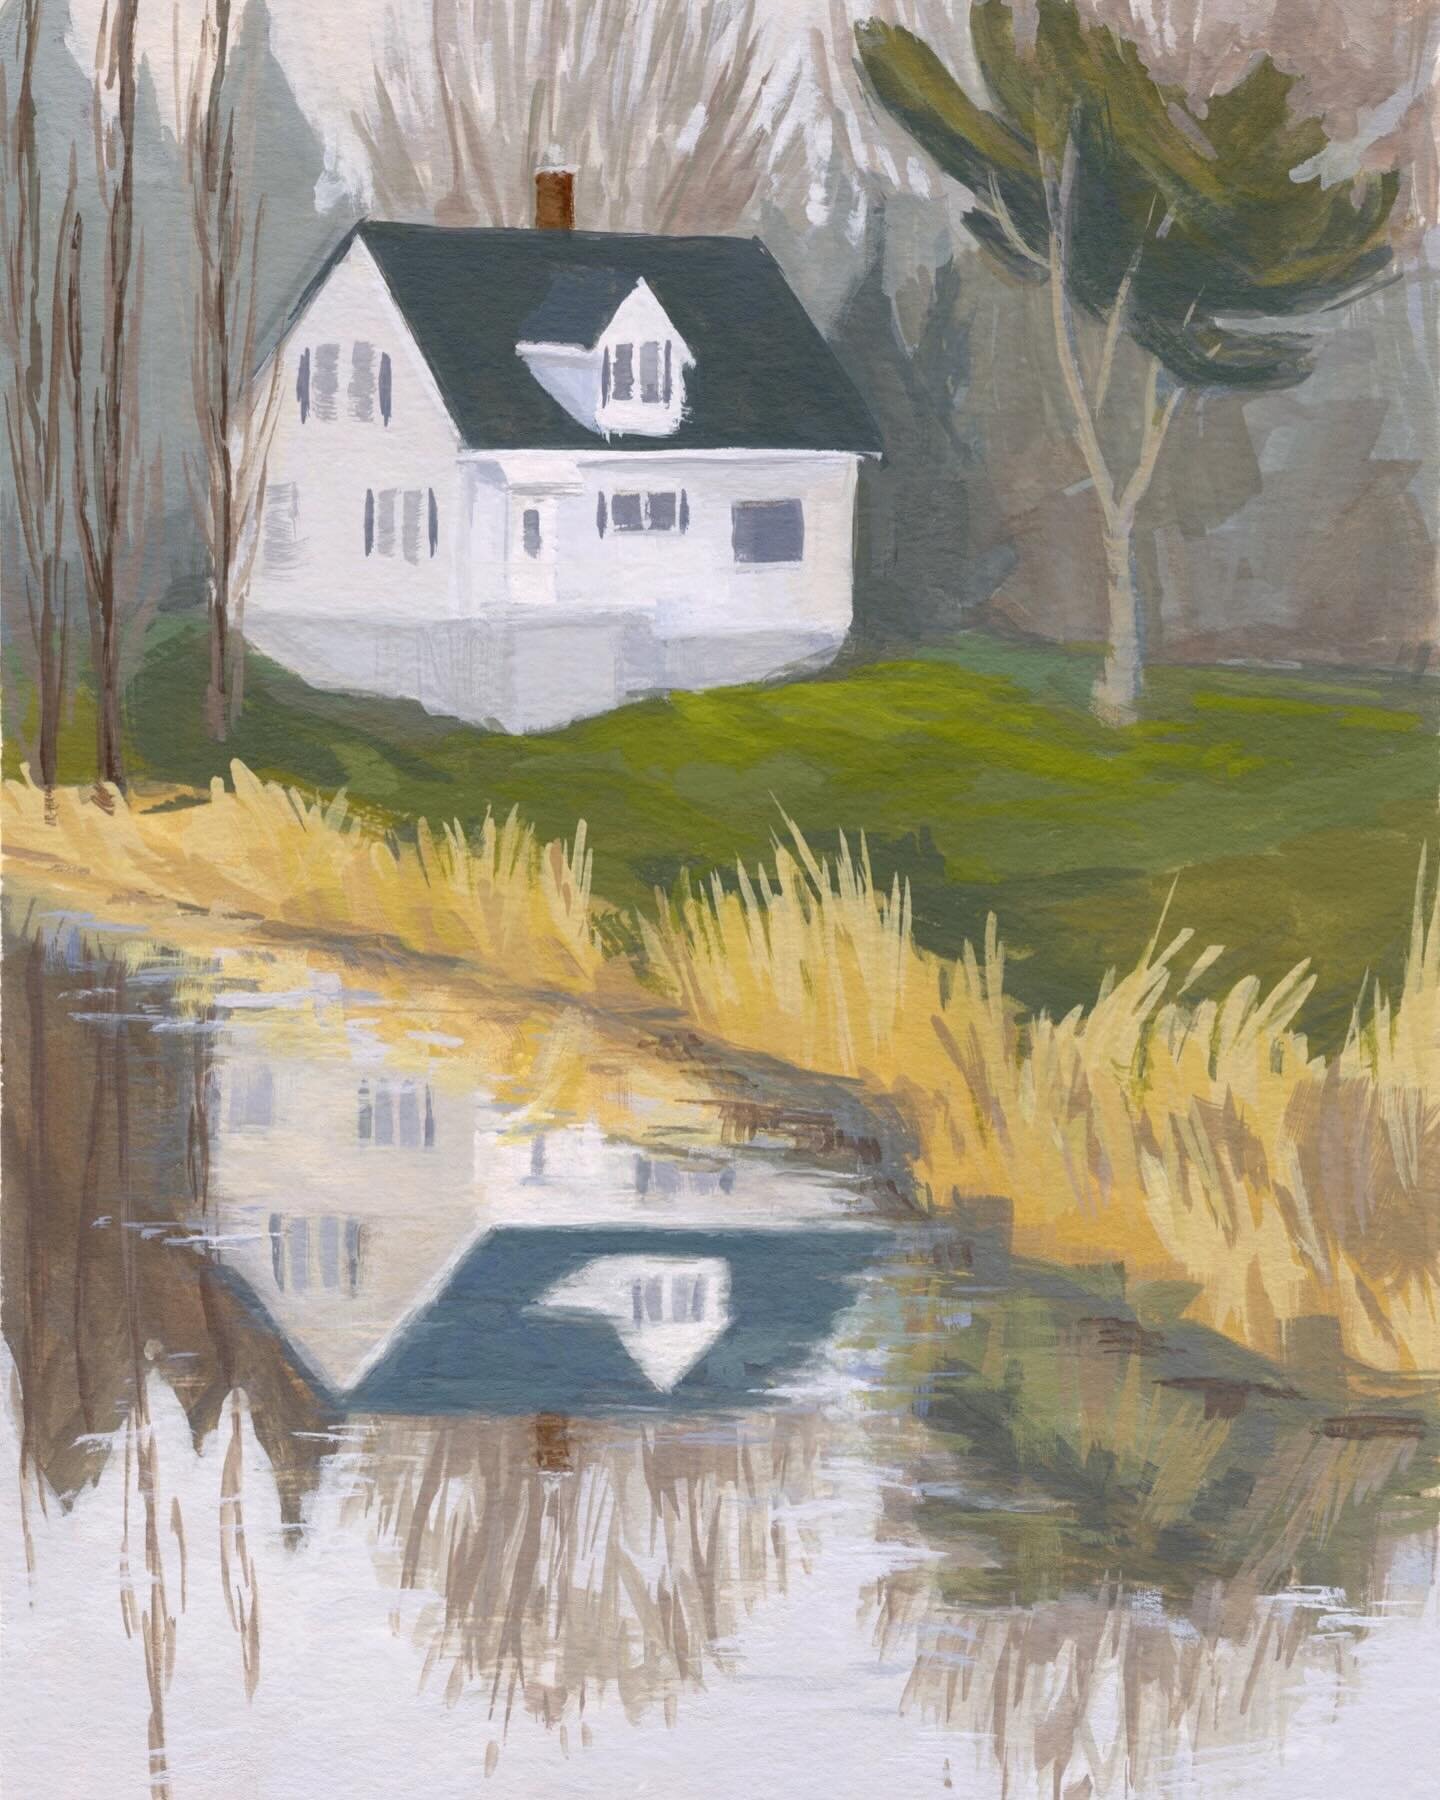 This painting sold to the new homeowners! 🙌🥰 I pass by this sweet house often on my near-daily walks to the ocean. I love when conditions are just right and I get to see its charming reflection in the marsh/pond waters. 💛

All paintings in this co